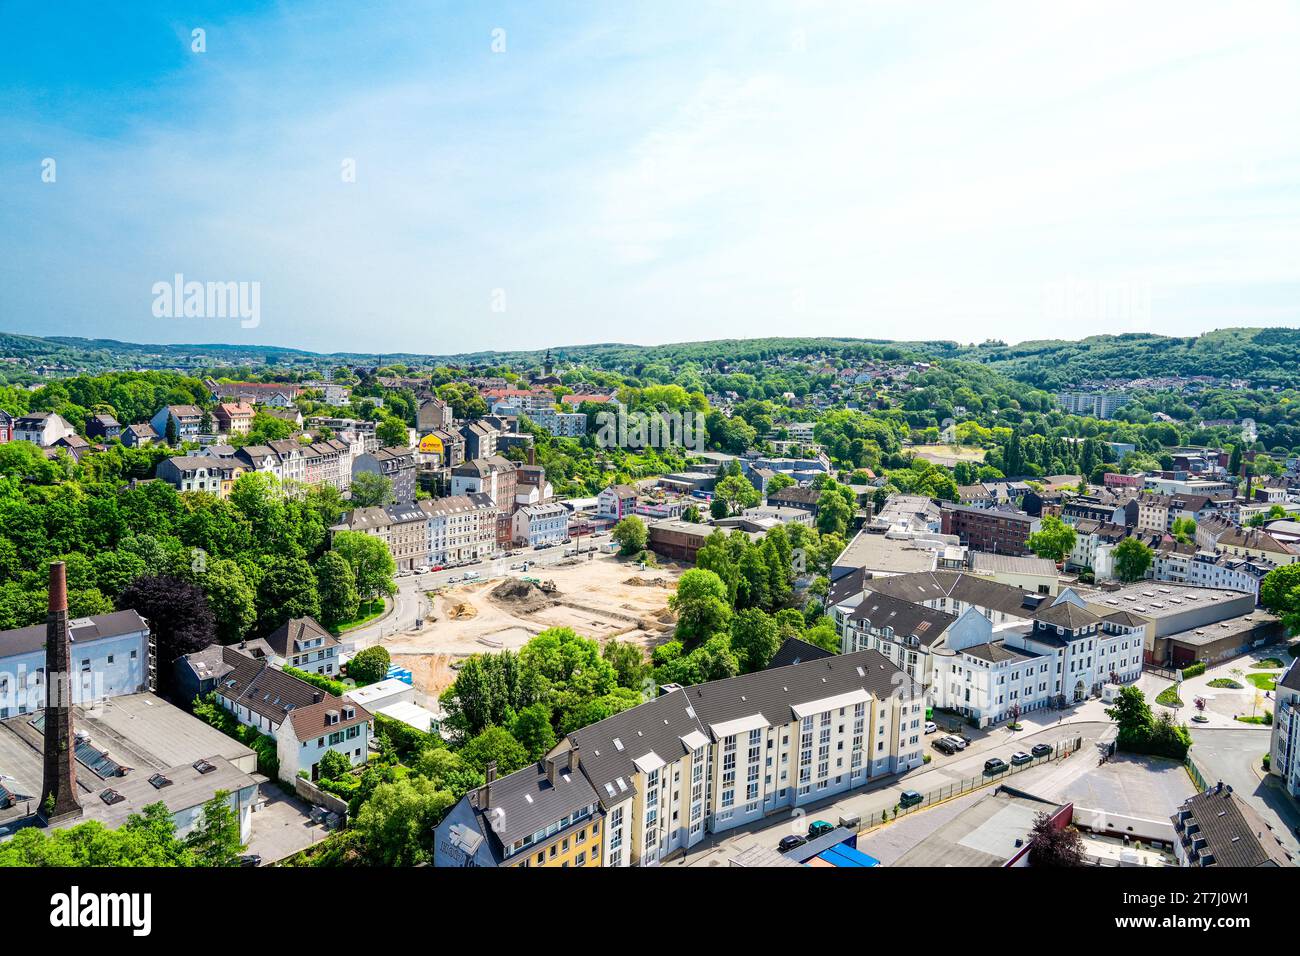 View of the city of Wuppertal. Stock Photo